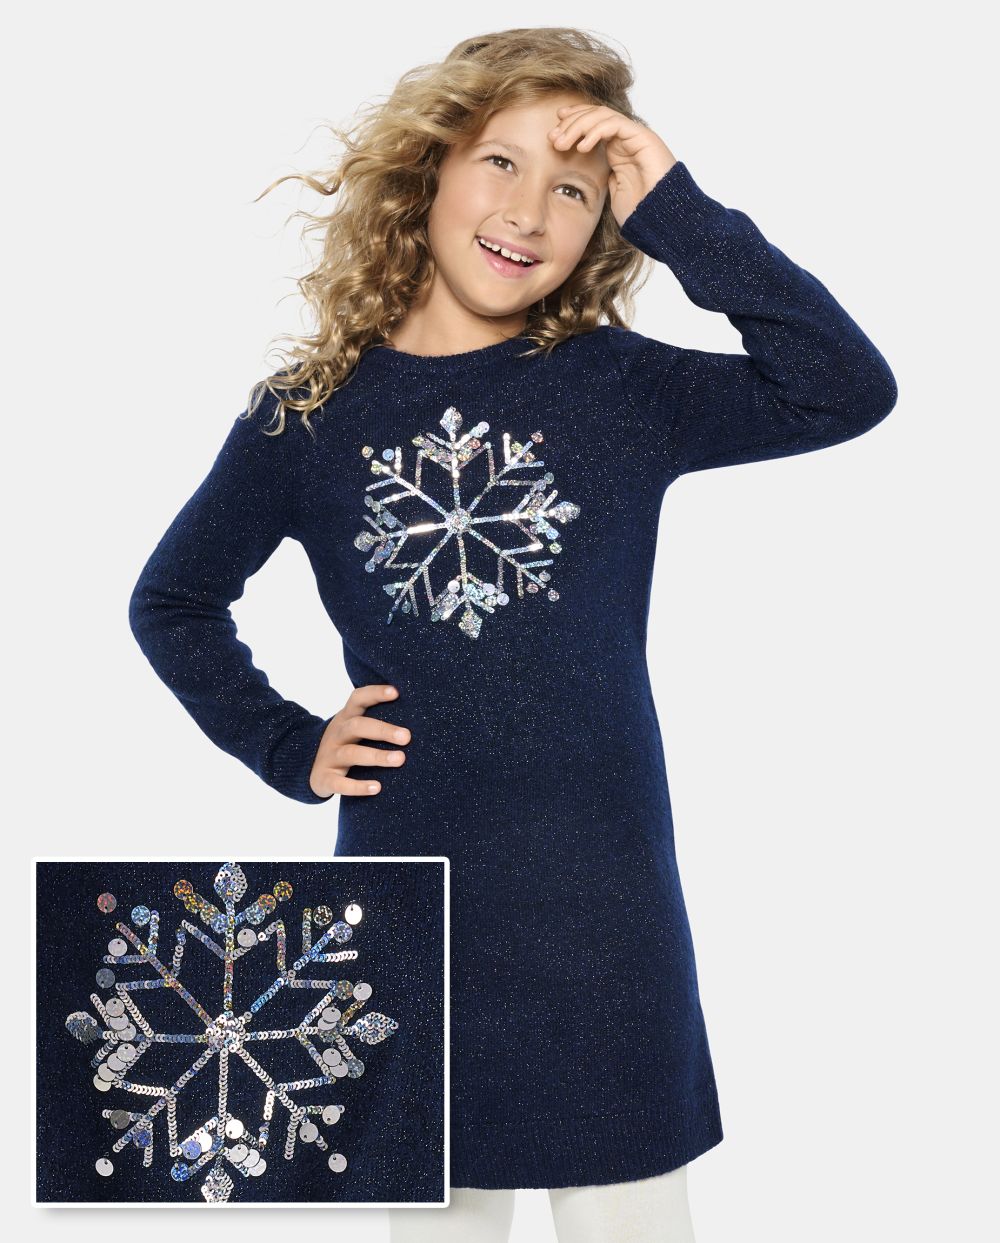 Tall Girls Long Sleeves Above the Knee Sequined Crew Neck Sweater Dress